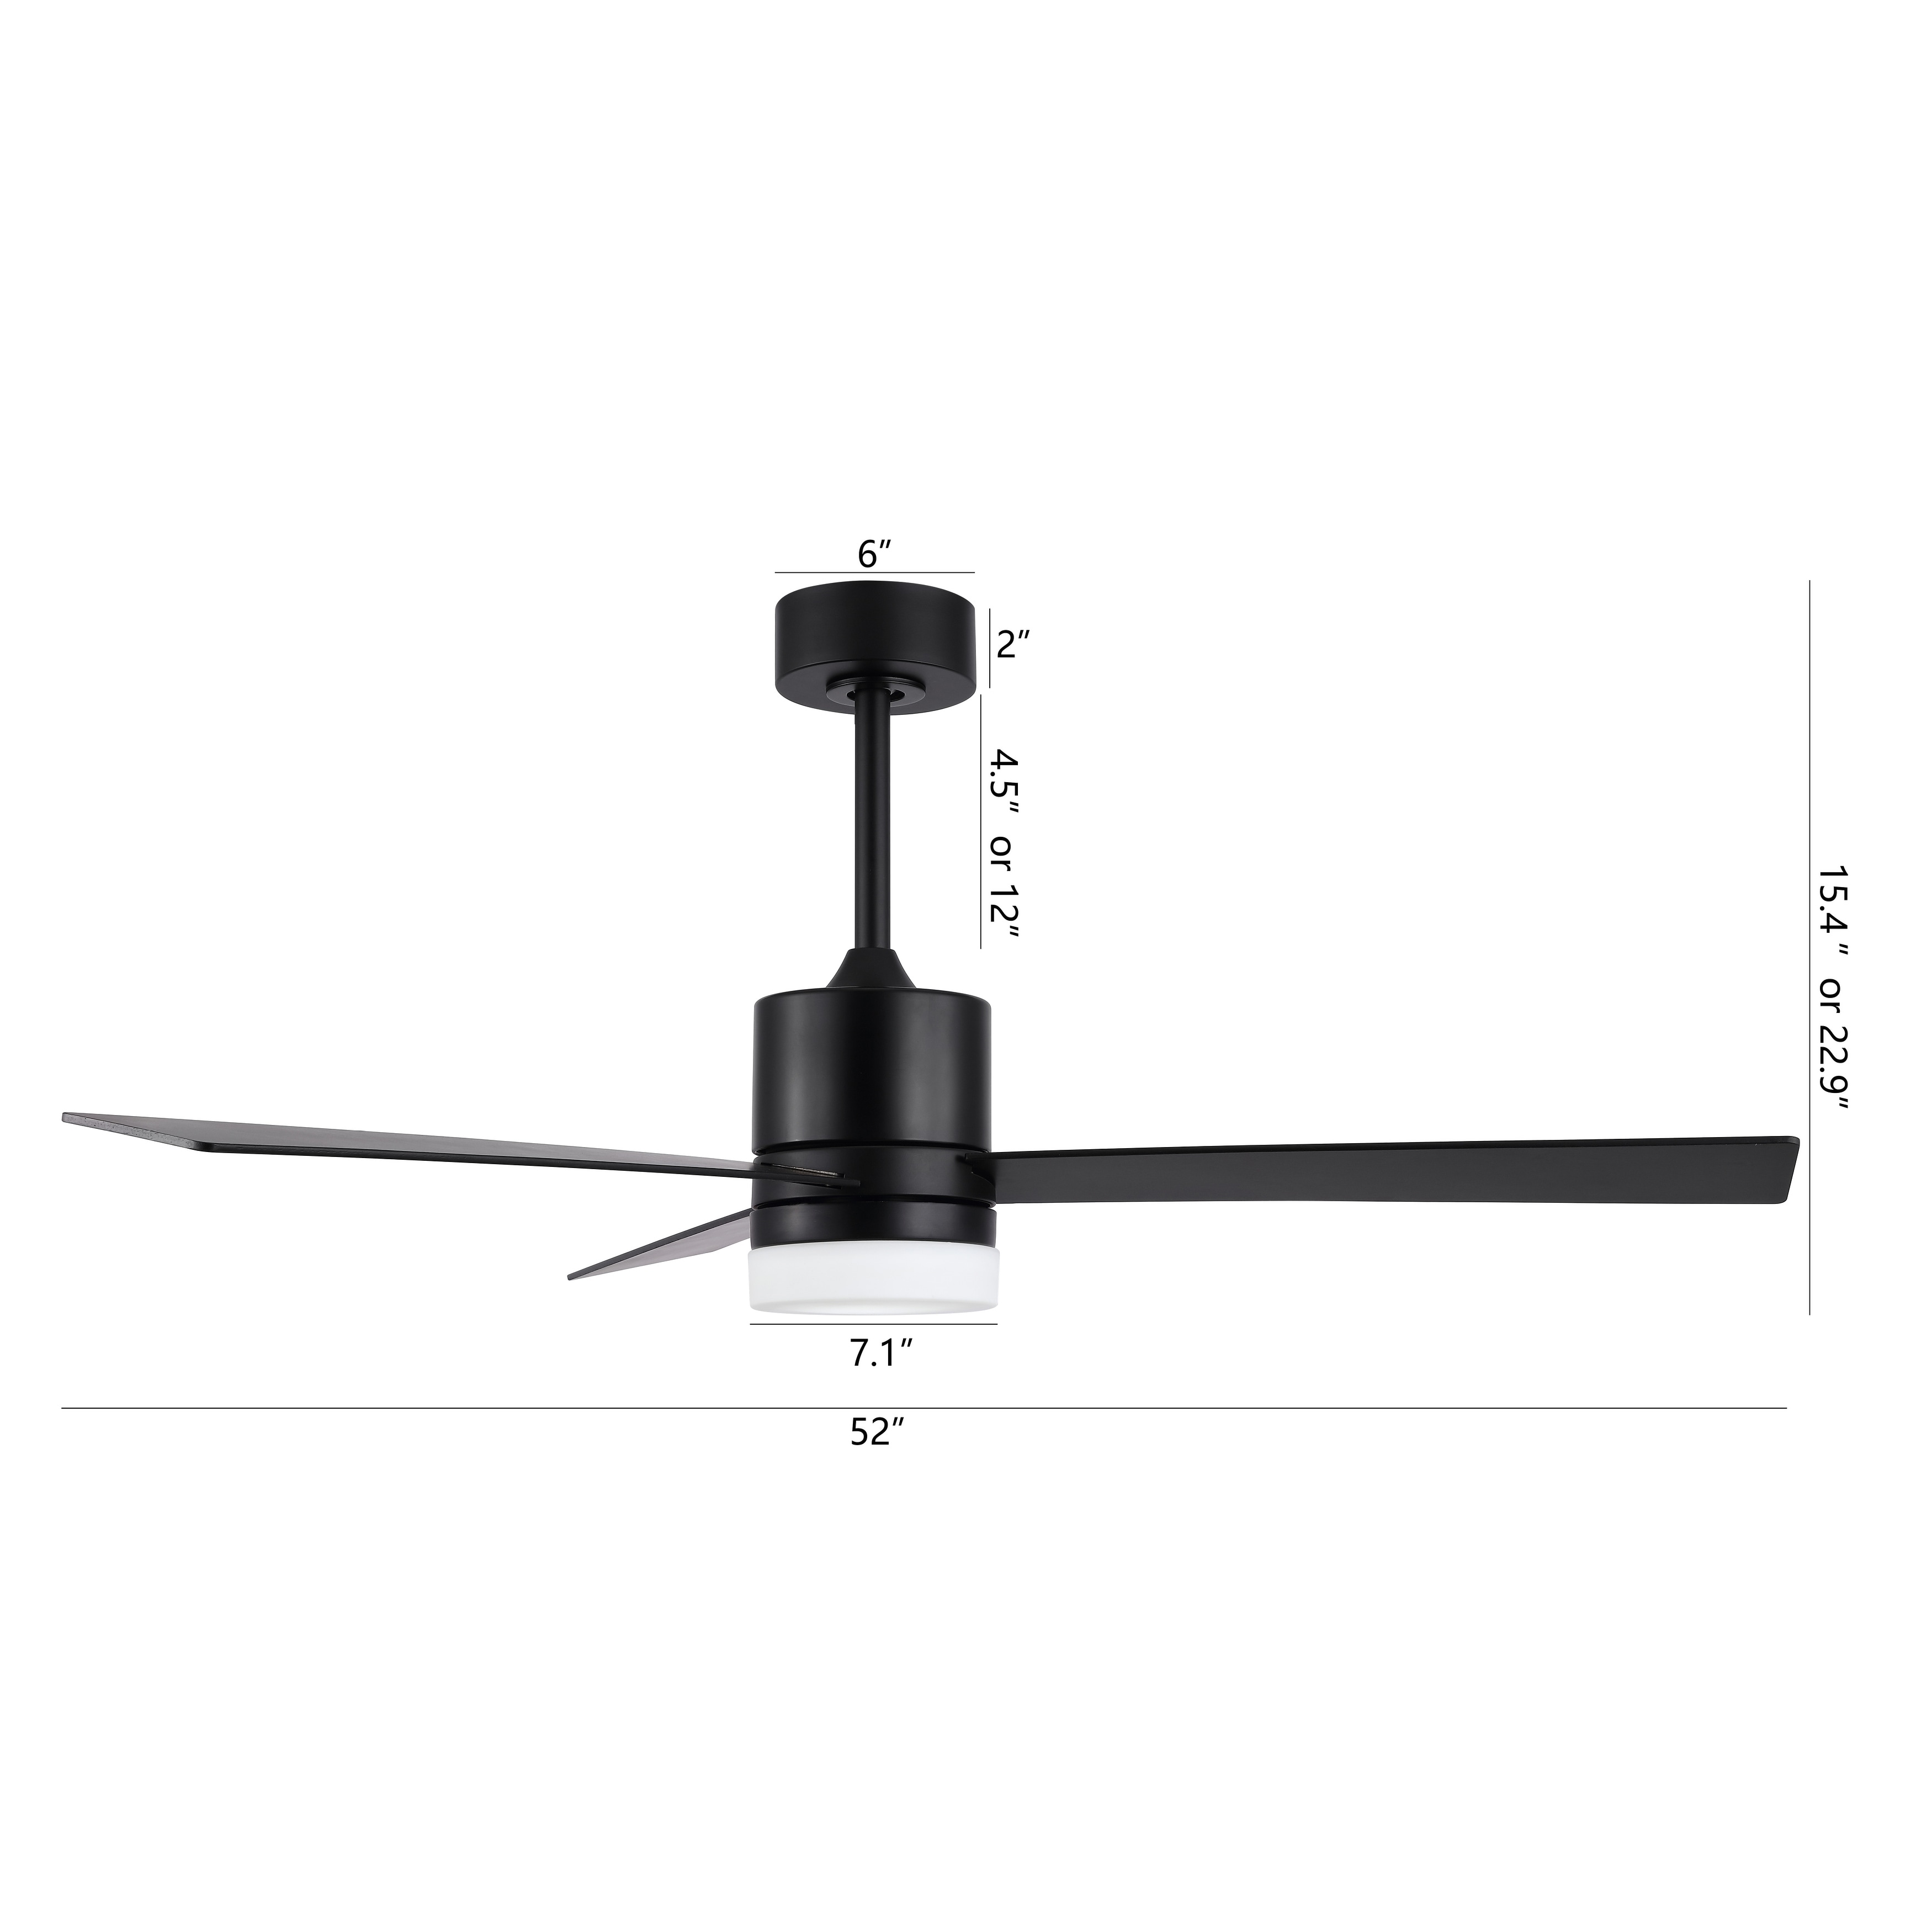 GetLedel 52-inch 3-Blade LED Ceiling Fan with Remote Control and Light Kit